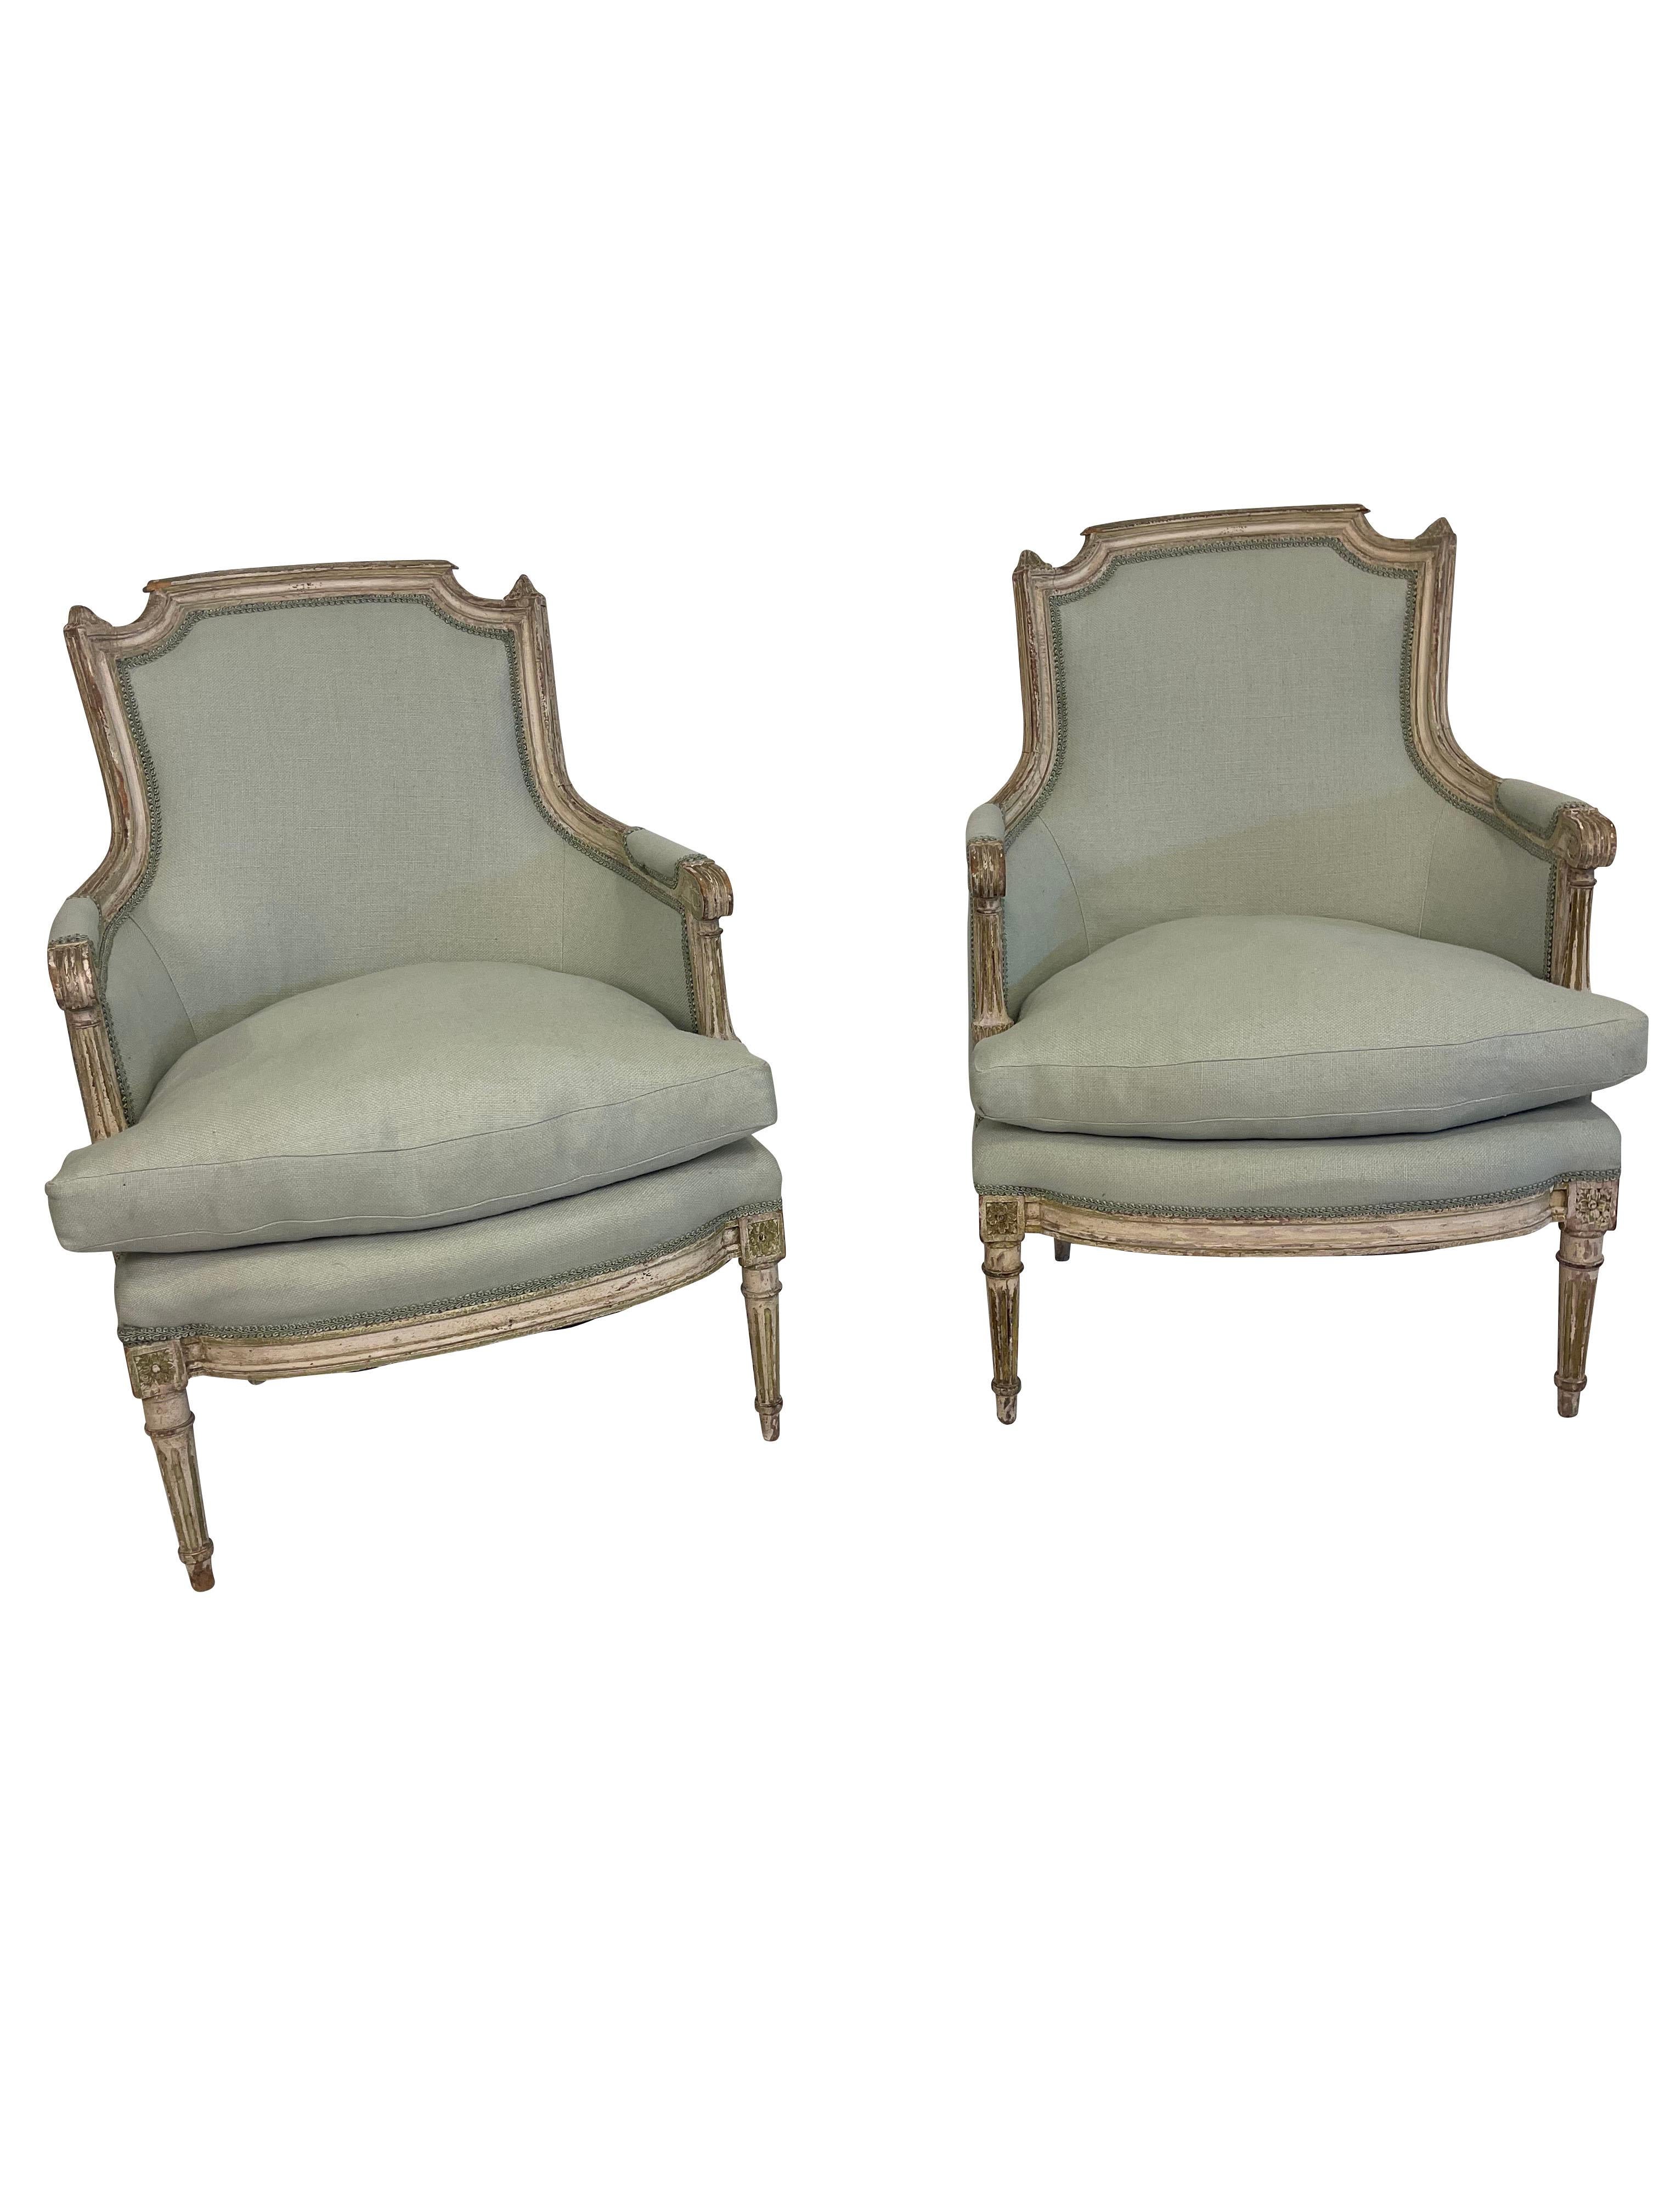 A pair of stunning French Louis XVI bergères, newly upholstered in a (blue/green) seafoam linen and gimp trim, with separate down-stuffed seat cushions. The chair frames are grey-painted, with 